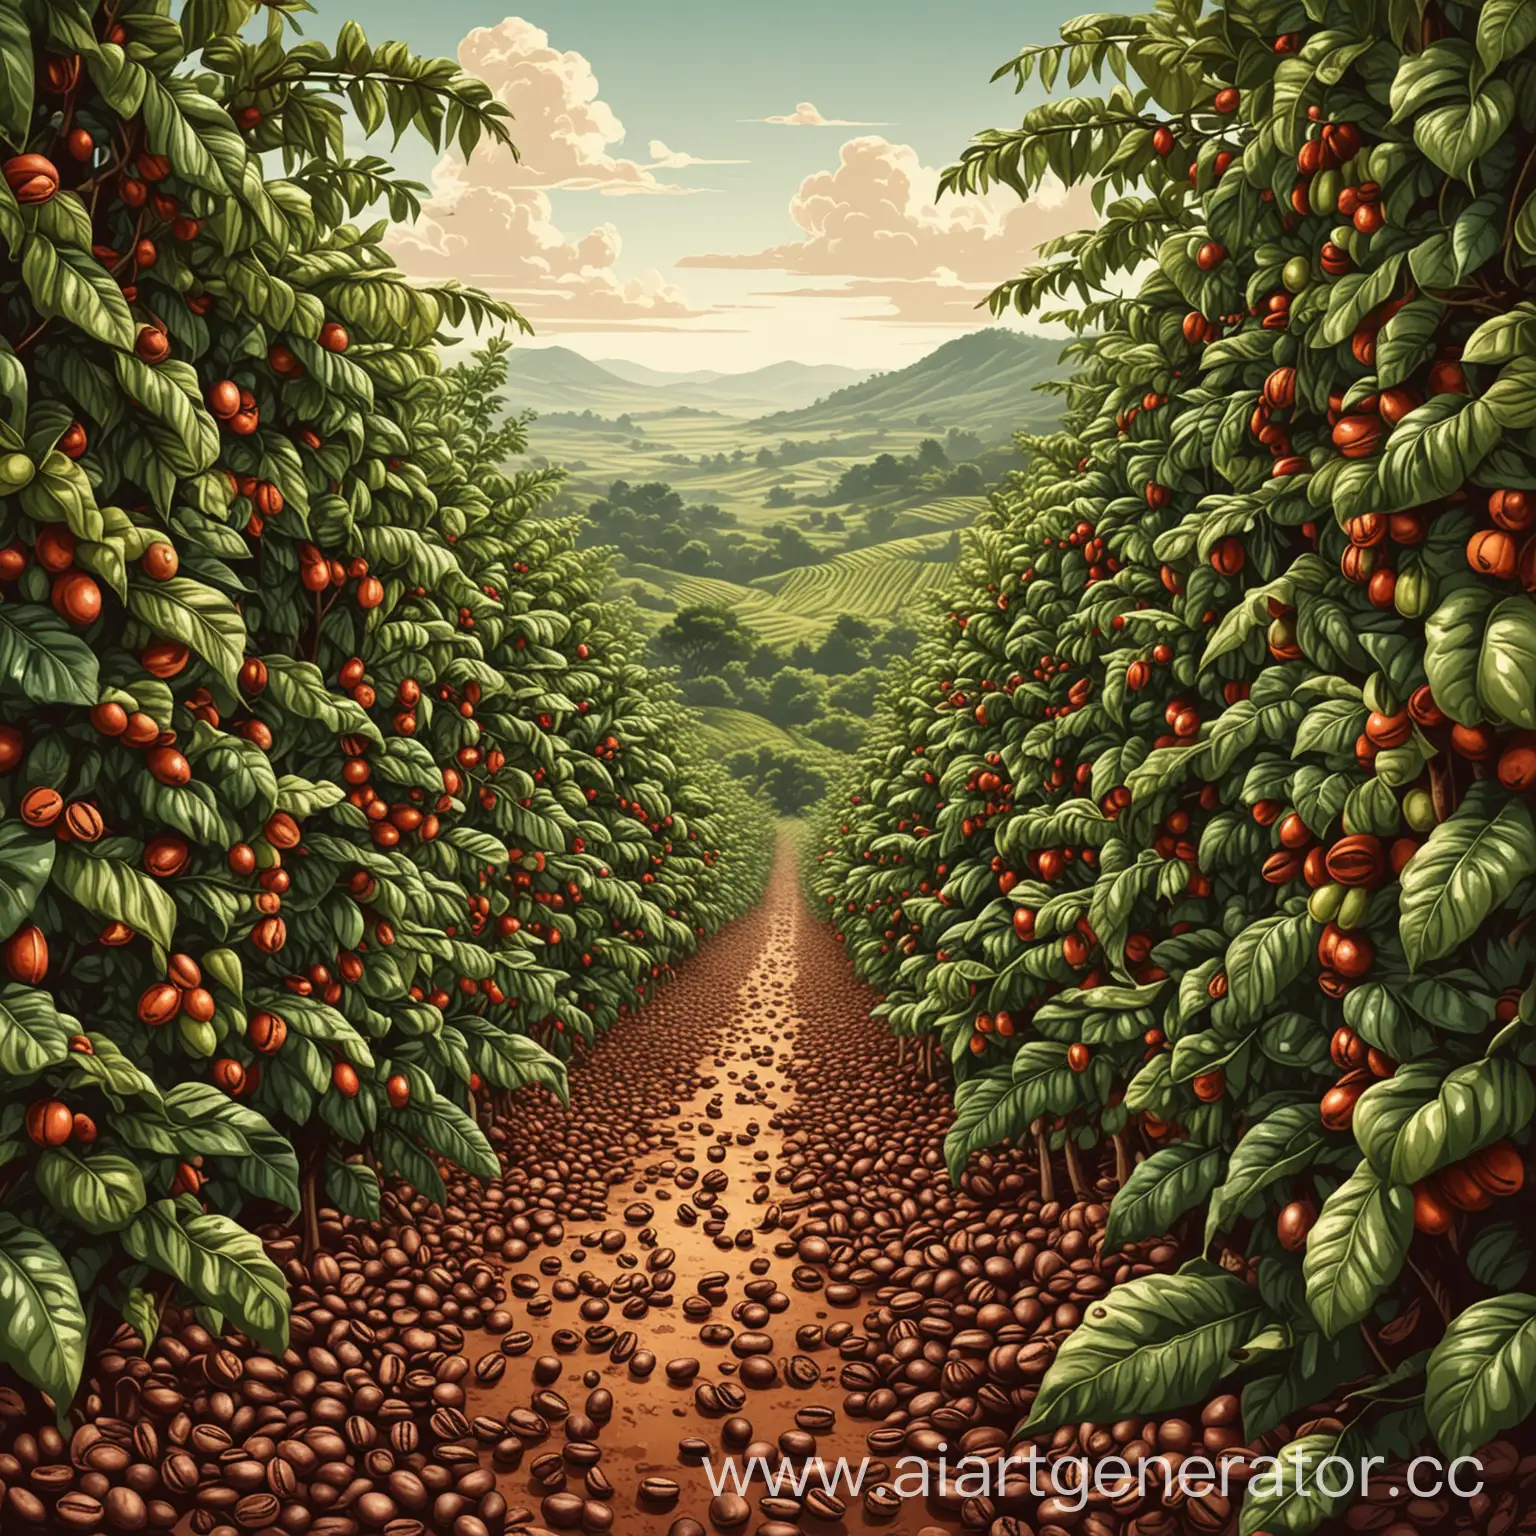 Coffee-Farm-with-Coffee-Beans-in-Vector-Style-High-Resolution-Illustration